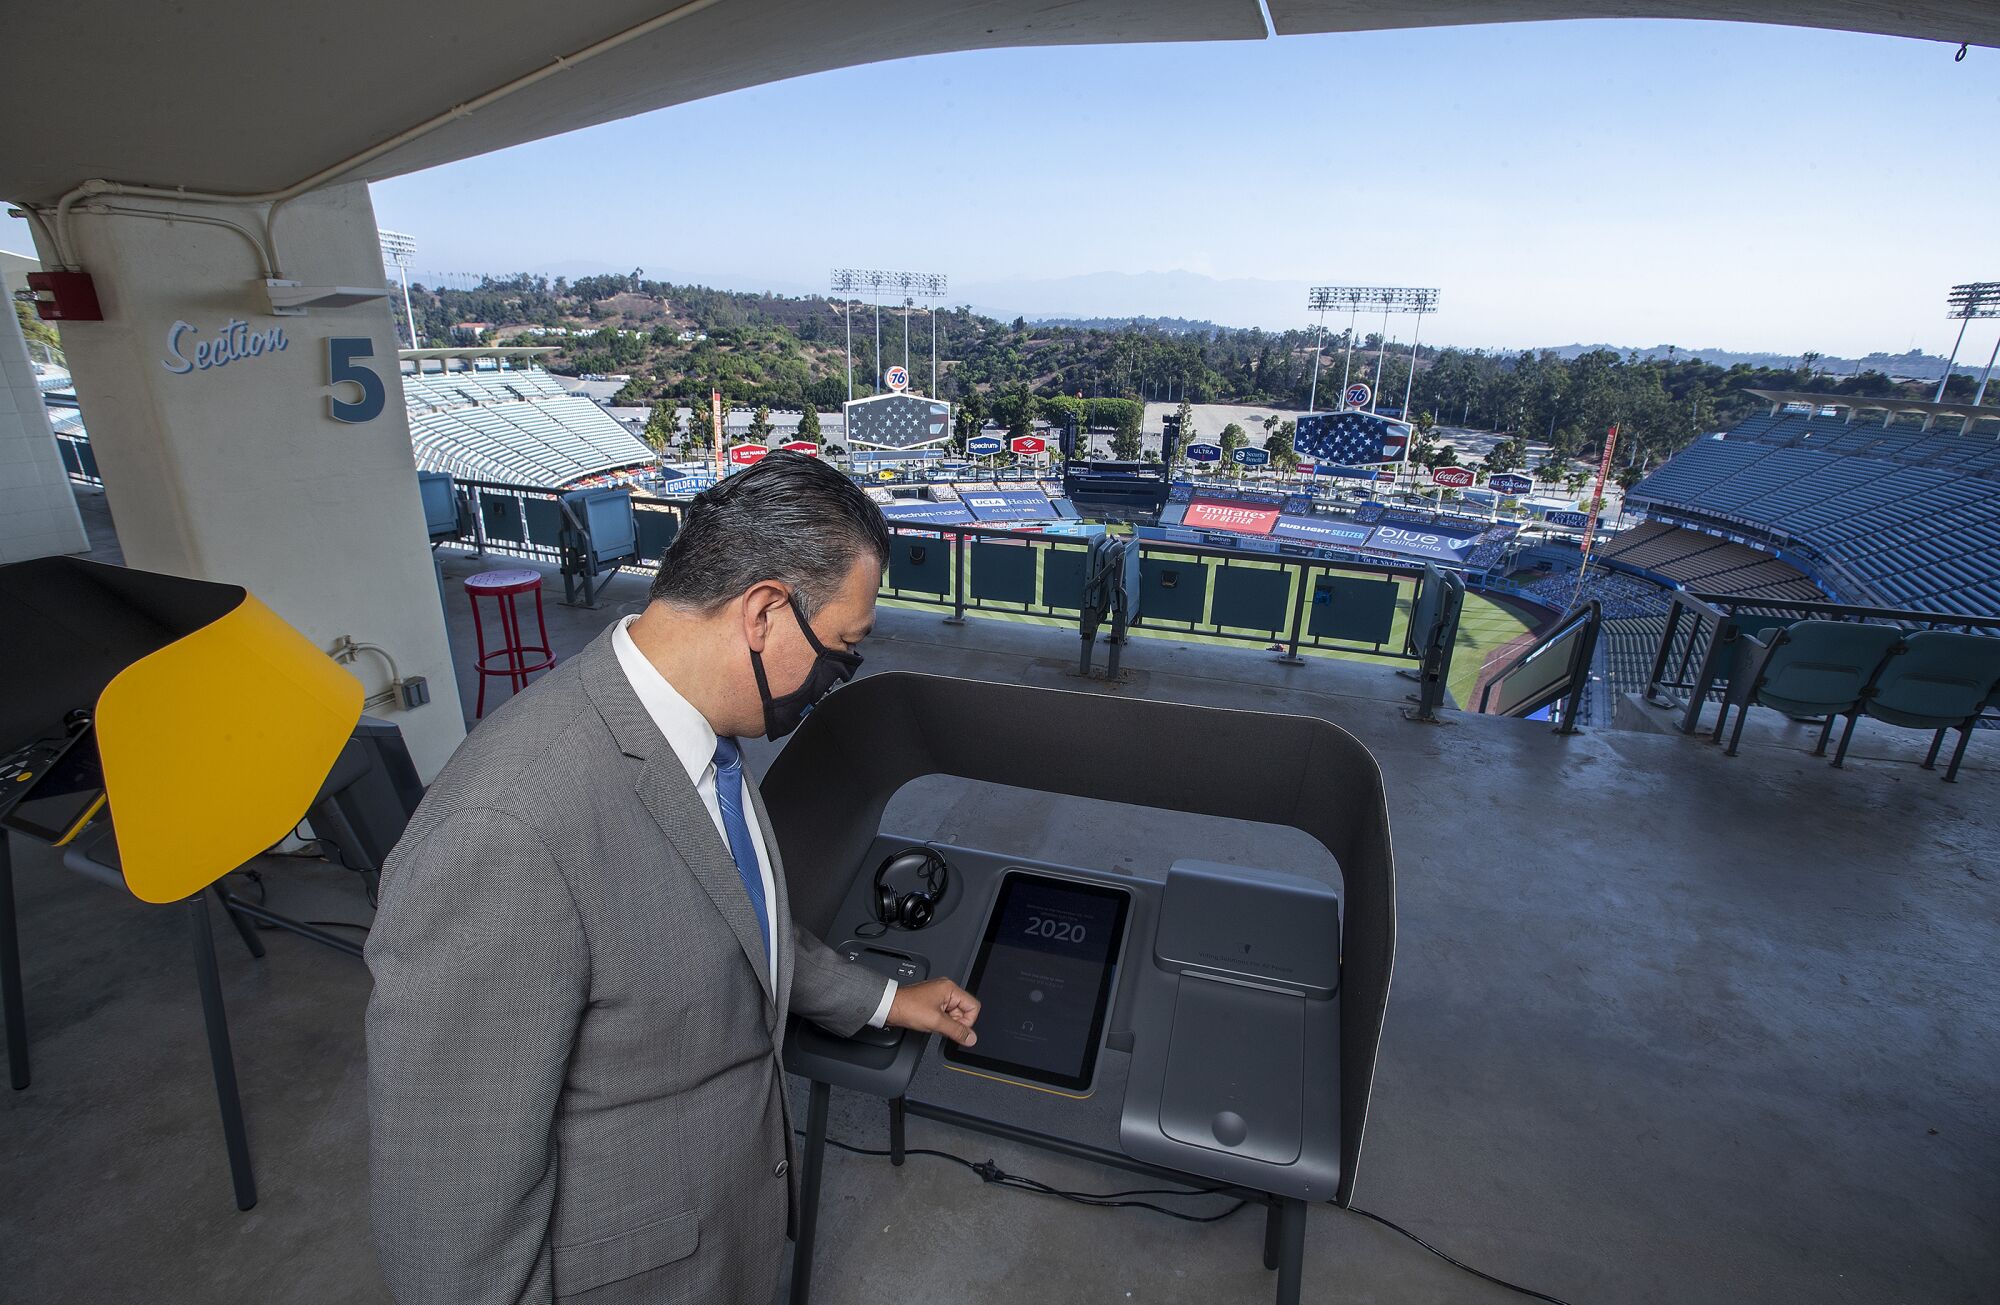 California Secretary of State Alex Padilla checks out a voting booth on display at Dodger Stadium. 